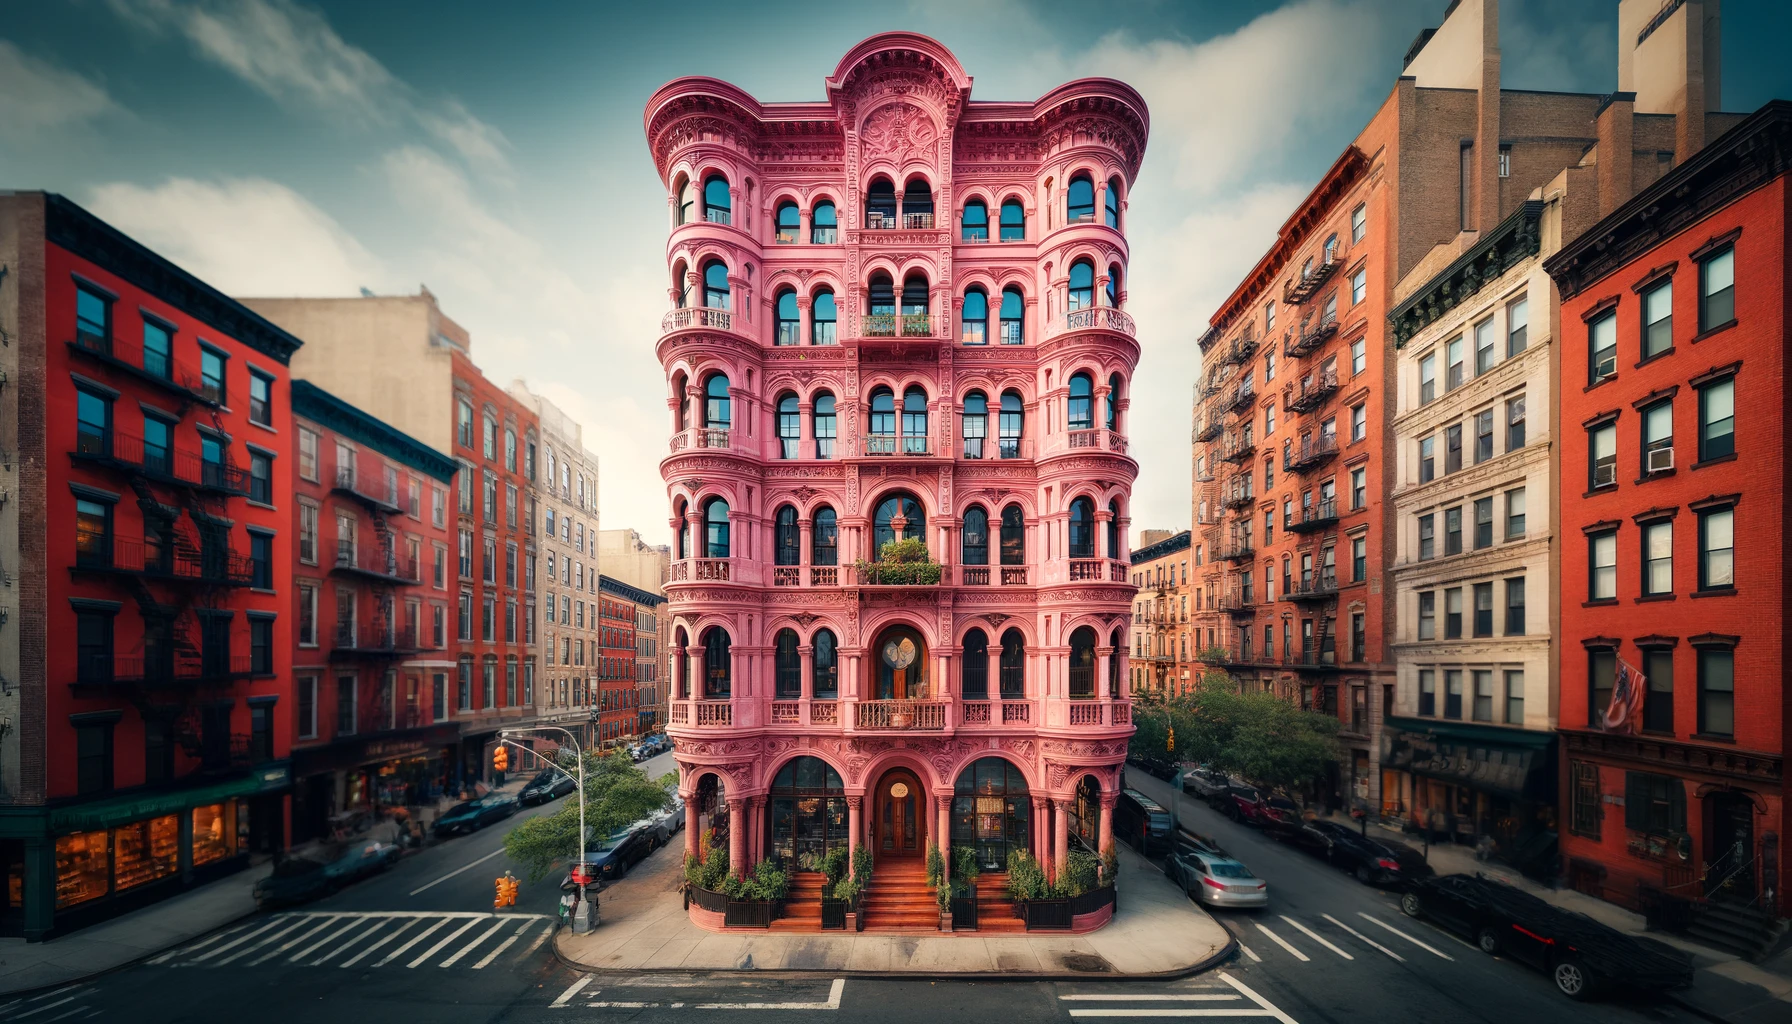 A wide-angle view of Palazzo Chupi, a vibrant pink five-story building in New York's West Village, featuring grand arches, intricate balconies, and large windows.